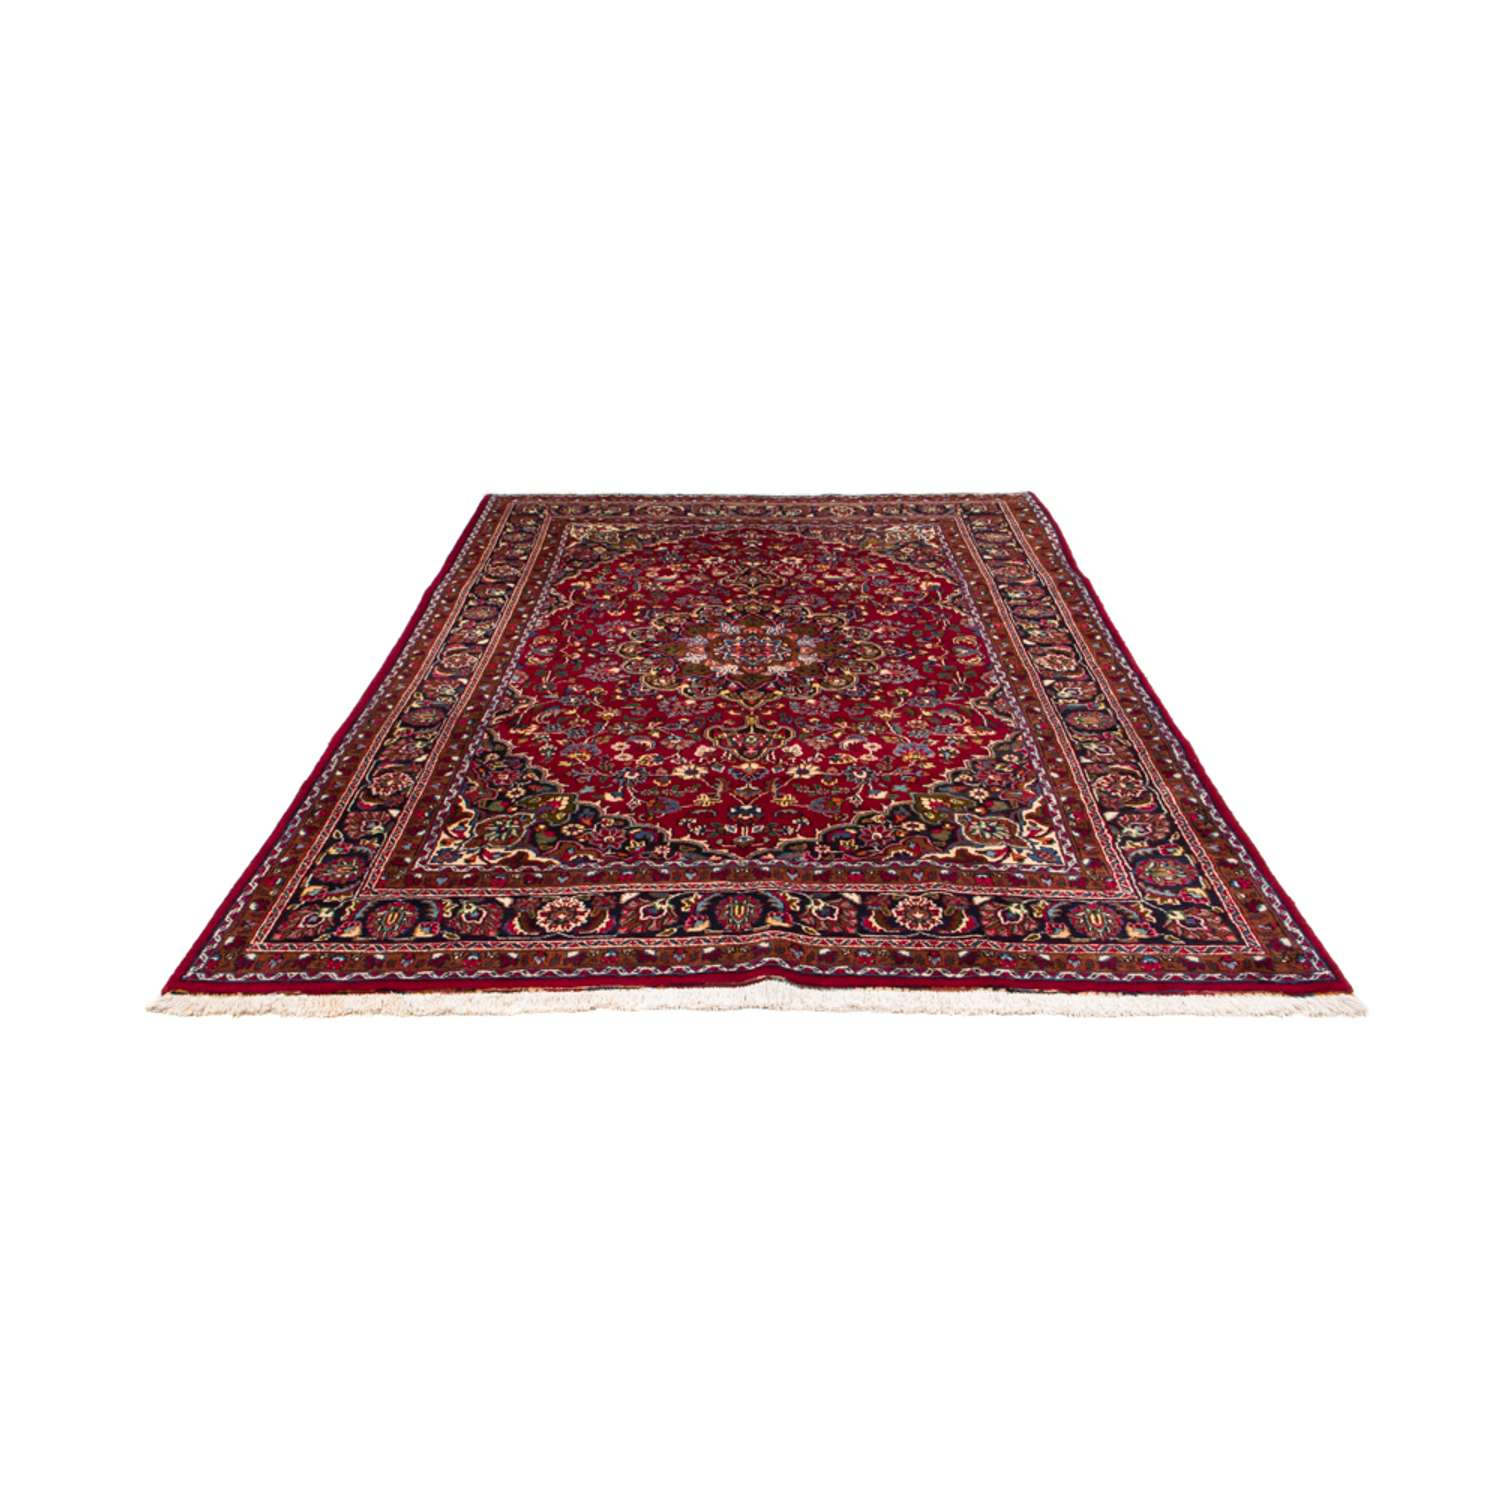 Perser Rug - Classic - Royal - 290 x 203 cm - red